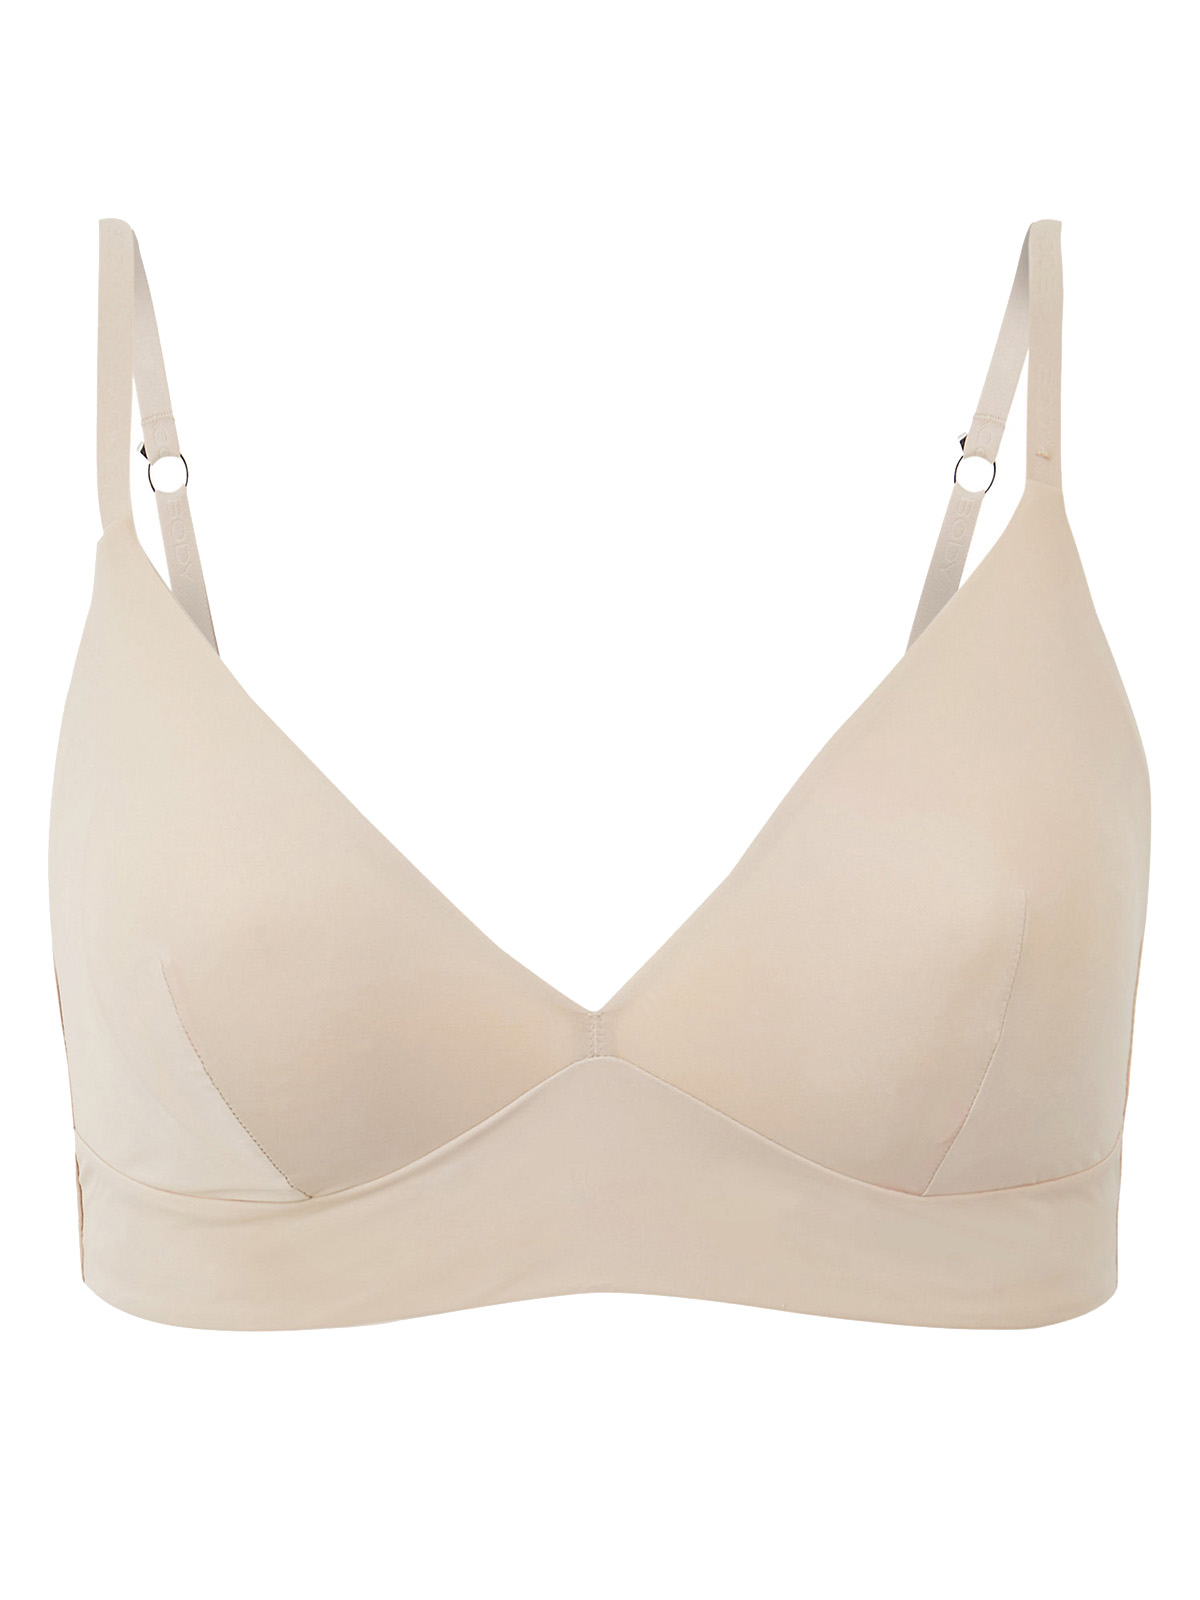 Marks and Spencer - - M&5 ALMOND Body Smoothing Non-Wired Bralette ...